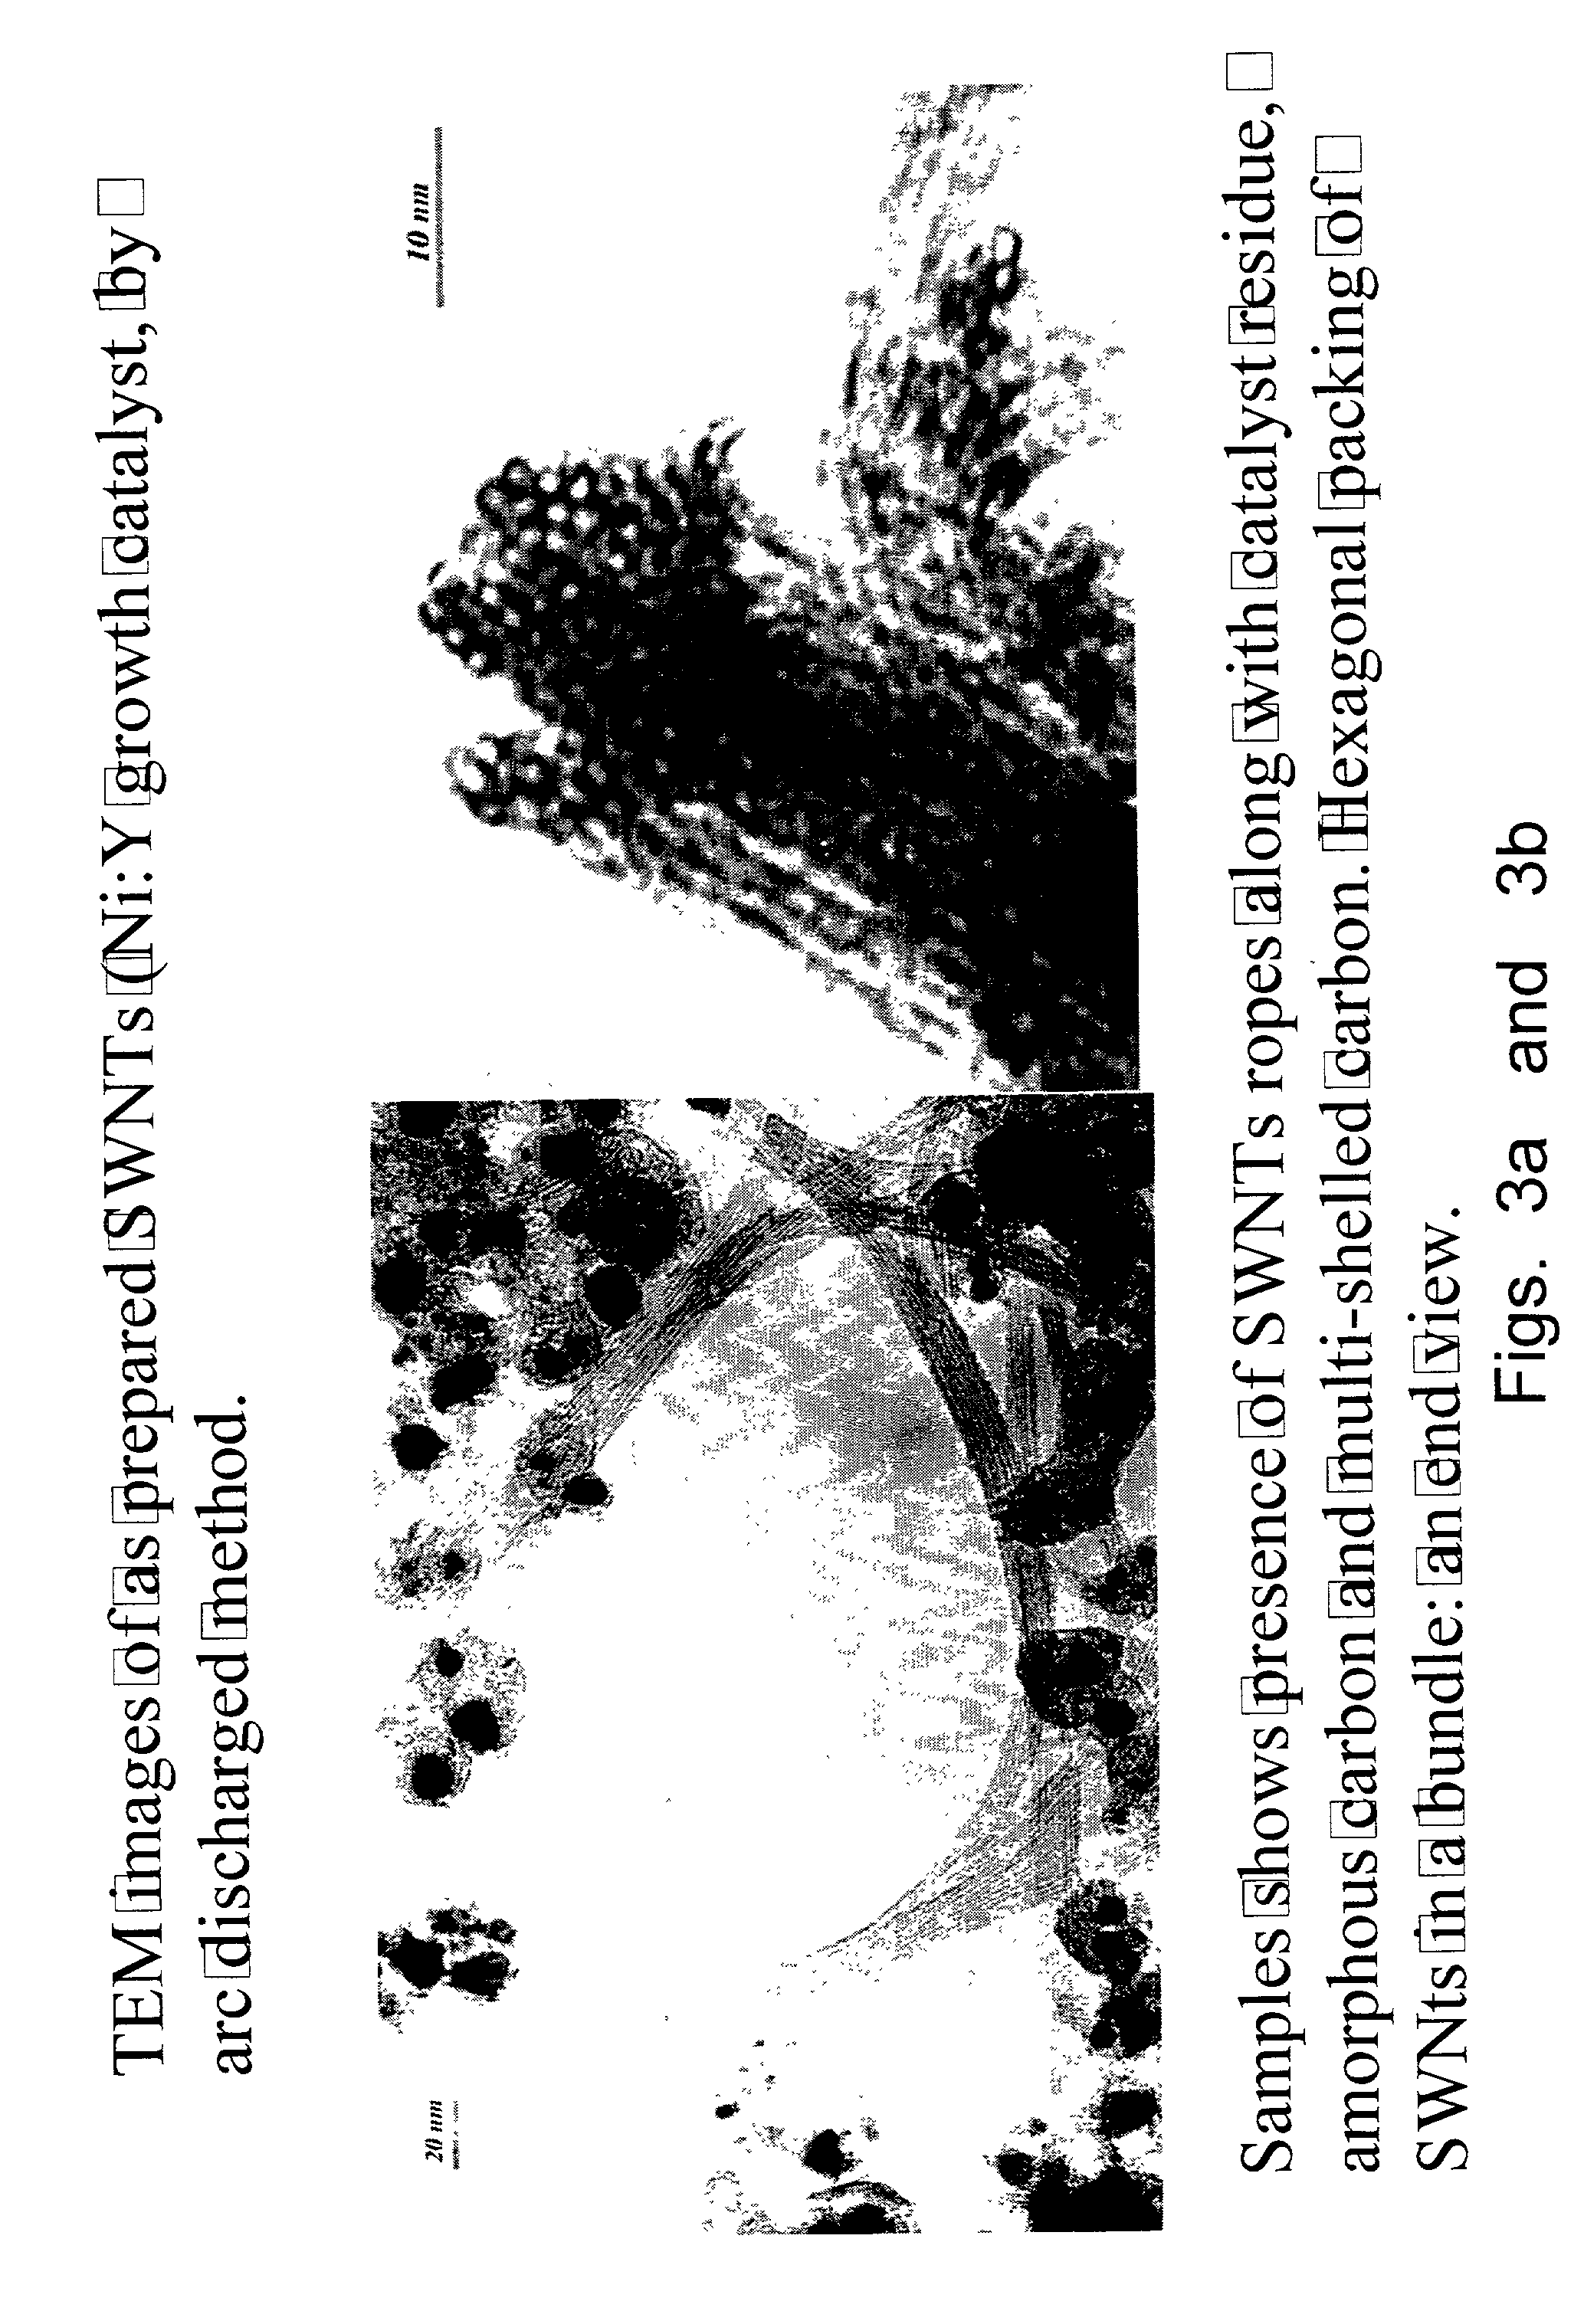 Purification of carbon filaments and their use in storing hydrogen